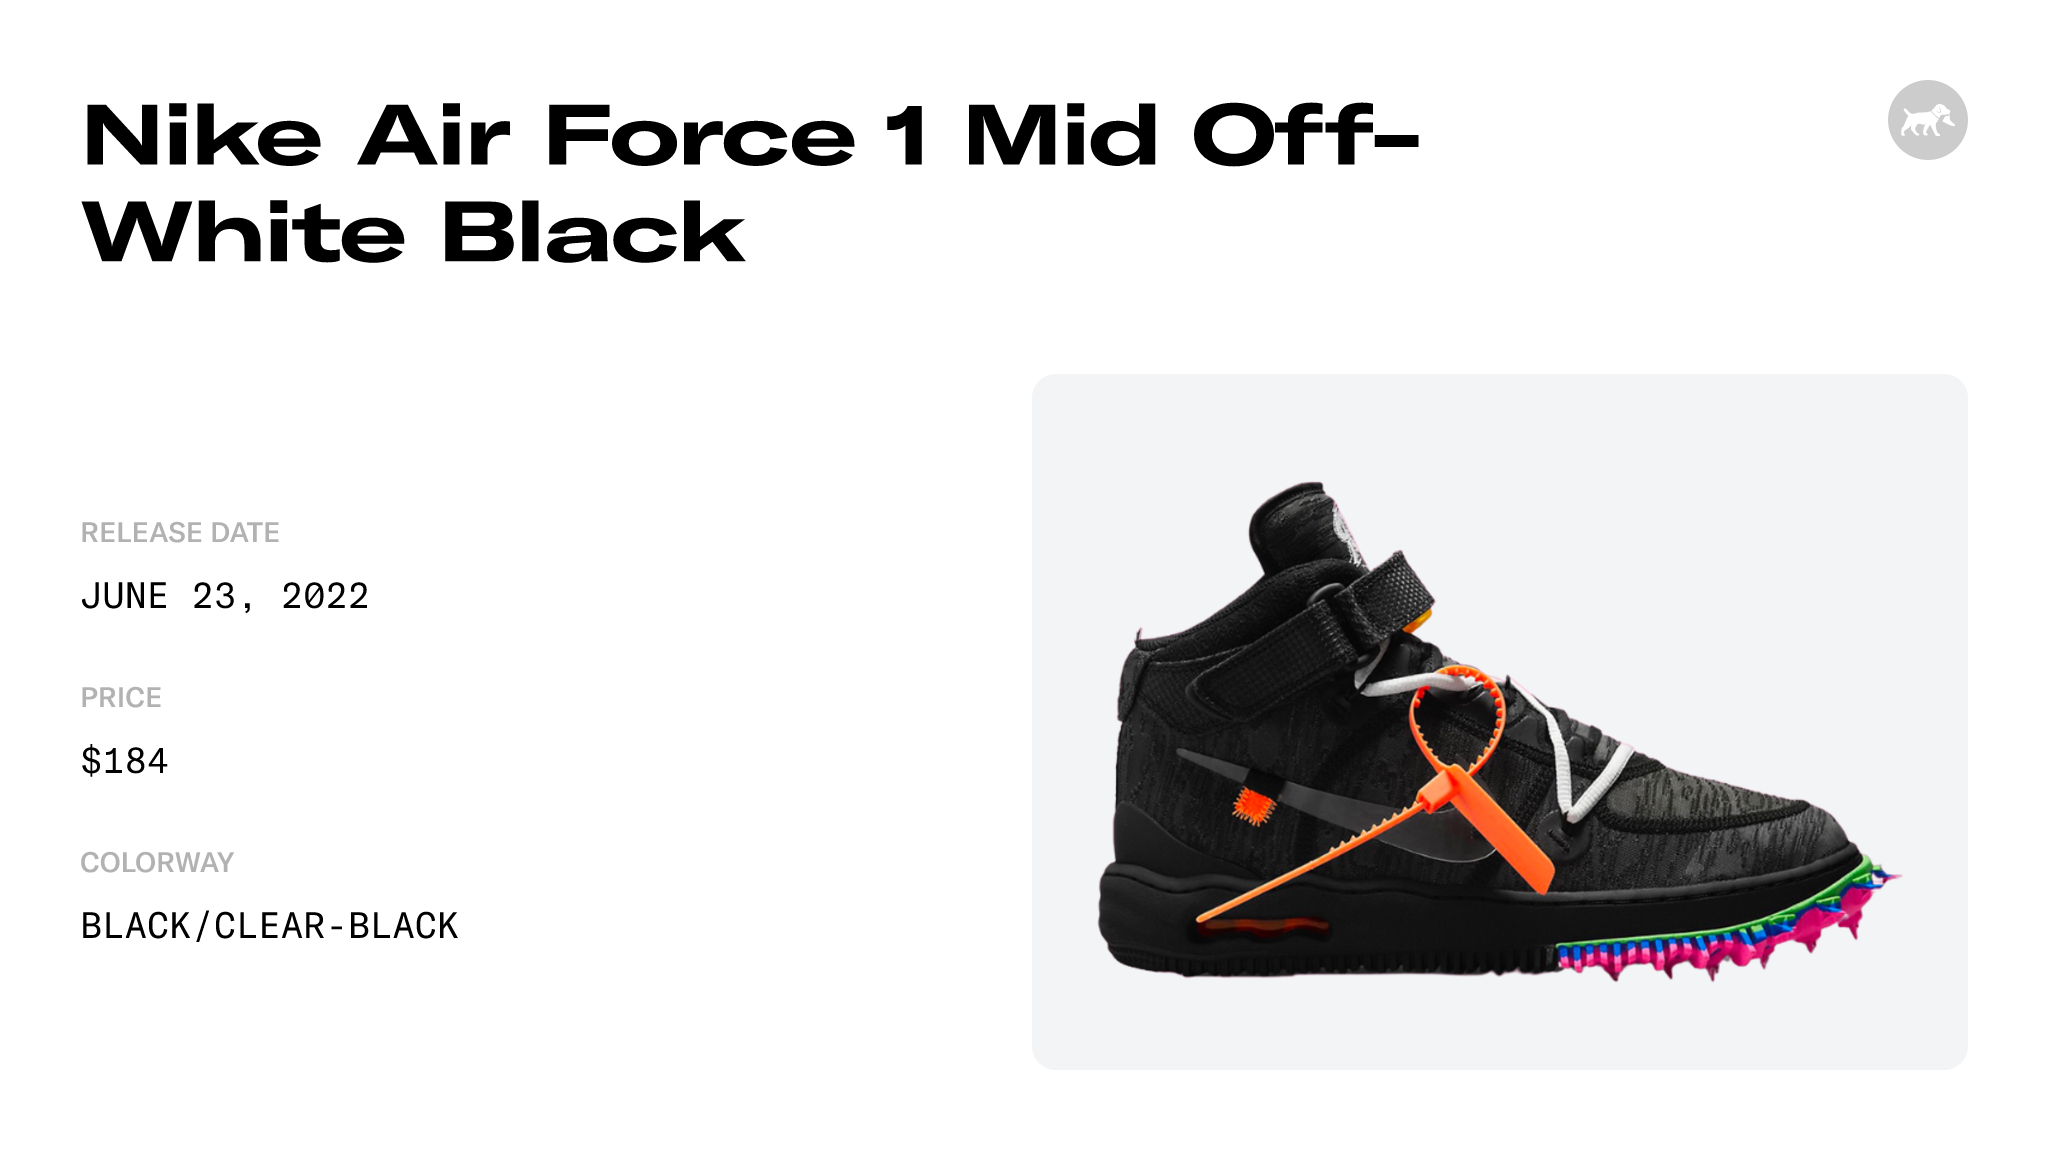 Air Force 1 Mid x Off-White ™ 'Black' (DO6290-001) Release Date